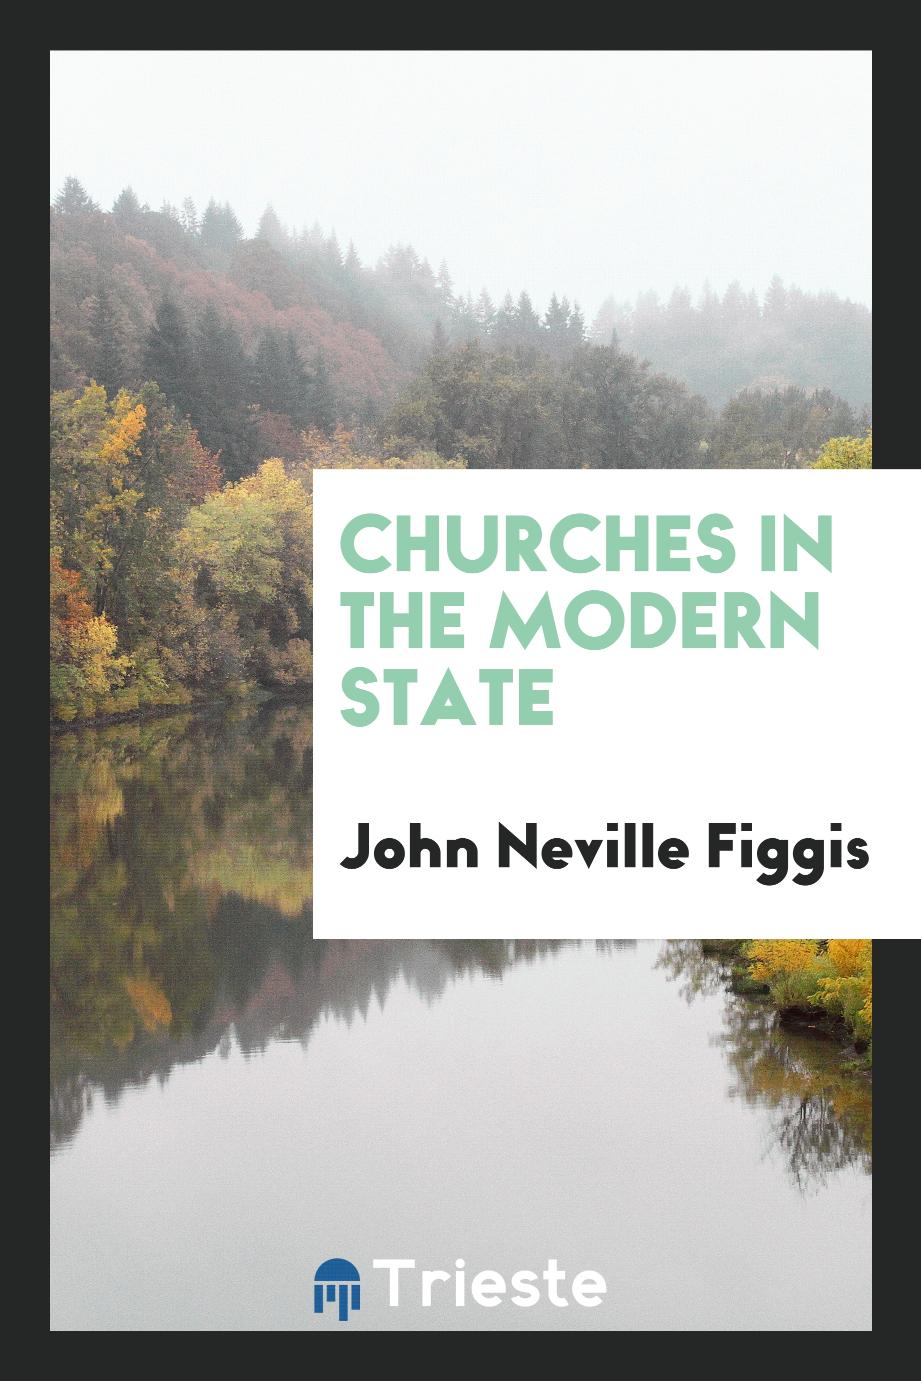 Churches in the modern state